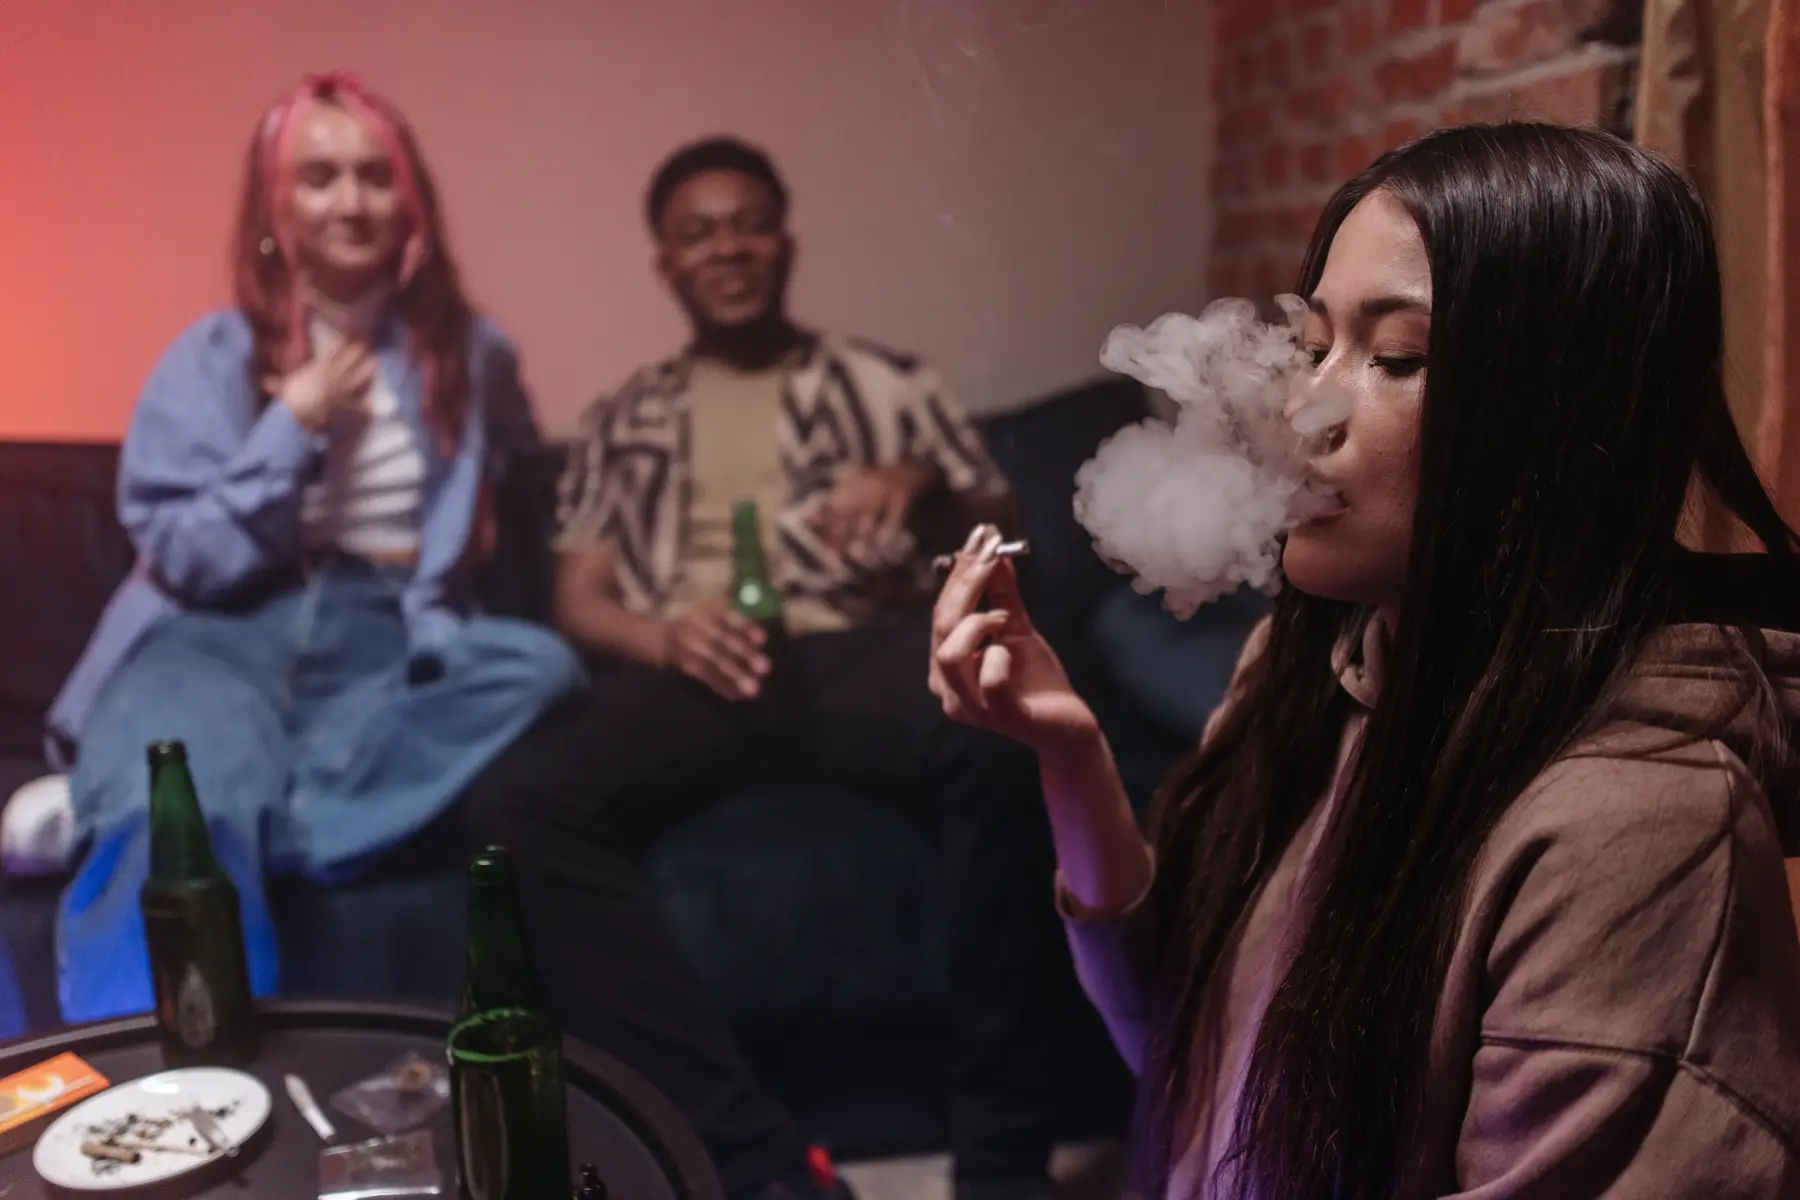 Group of young friends smoking cannabis and drinking beer